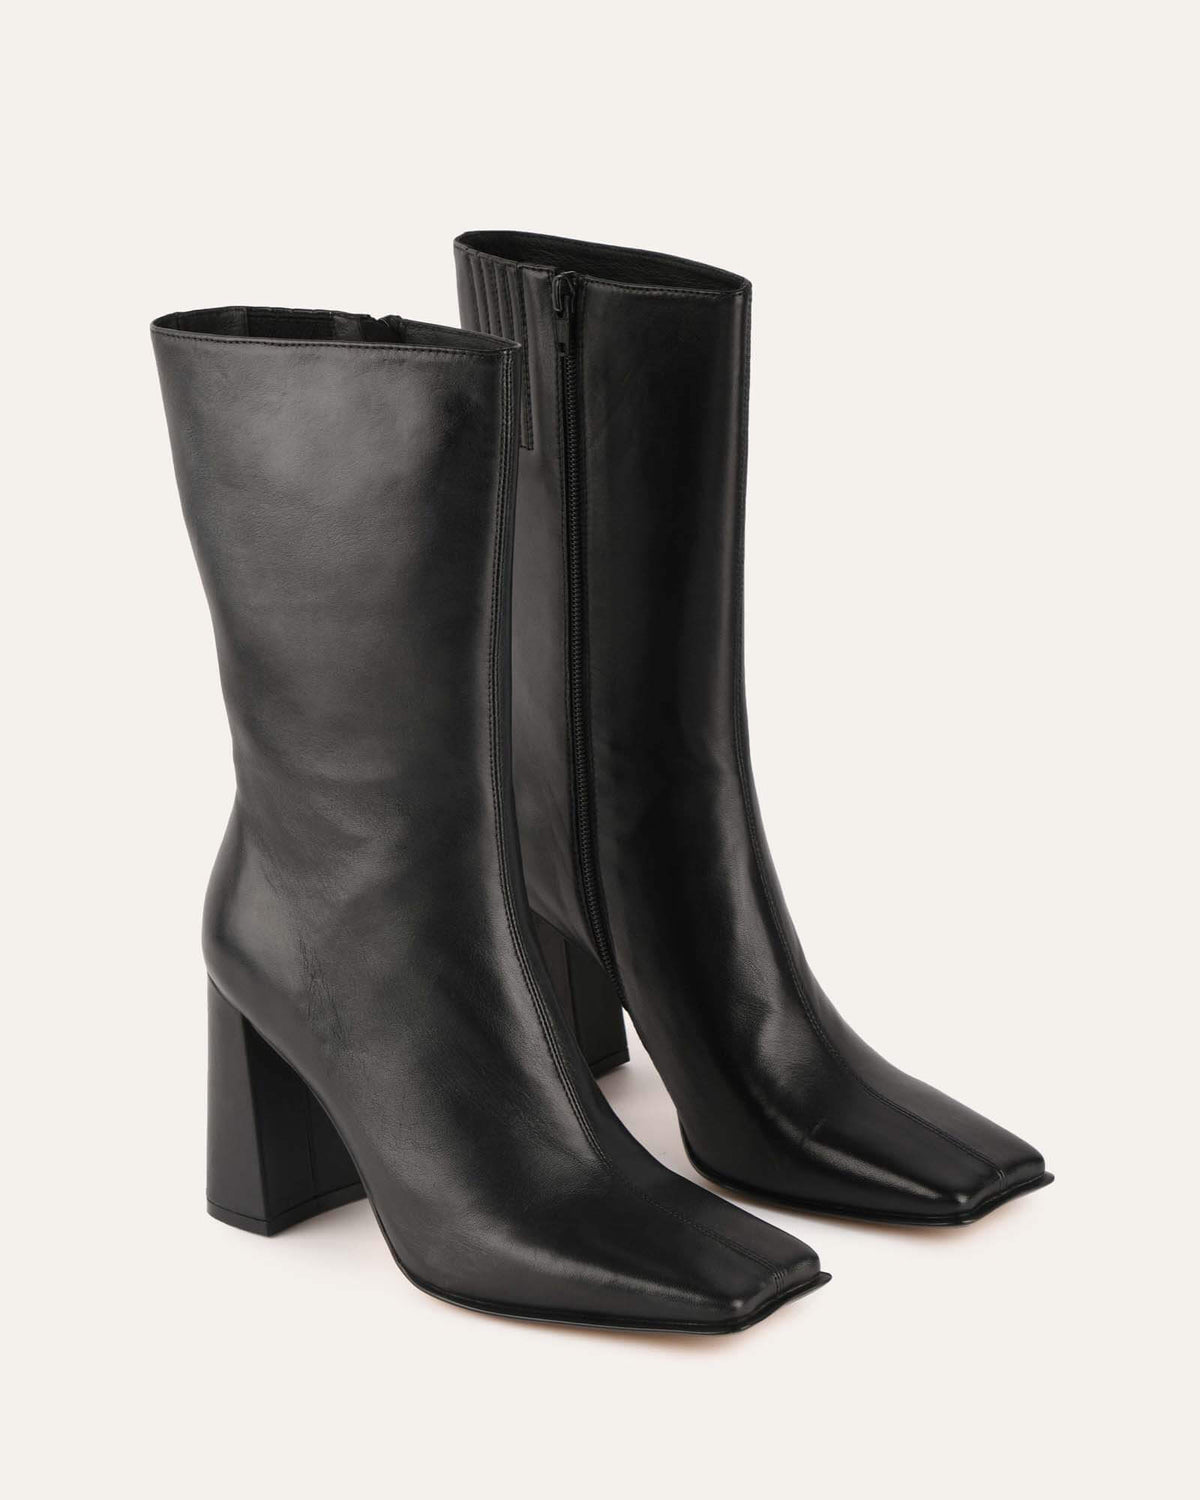 RUSH CALF BOOTS BLACK LEATHER